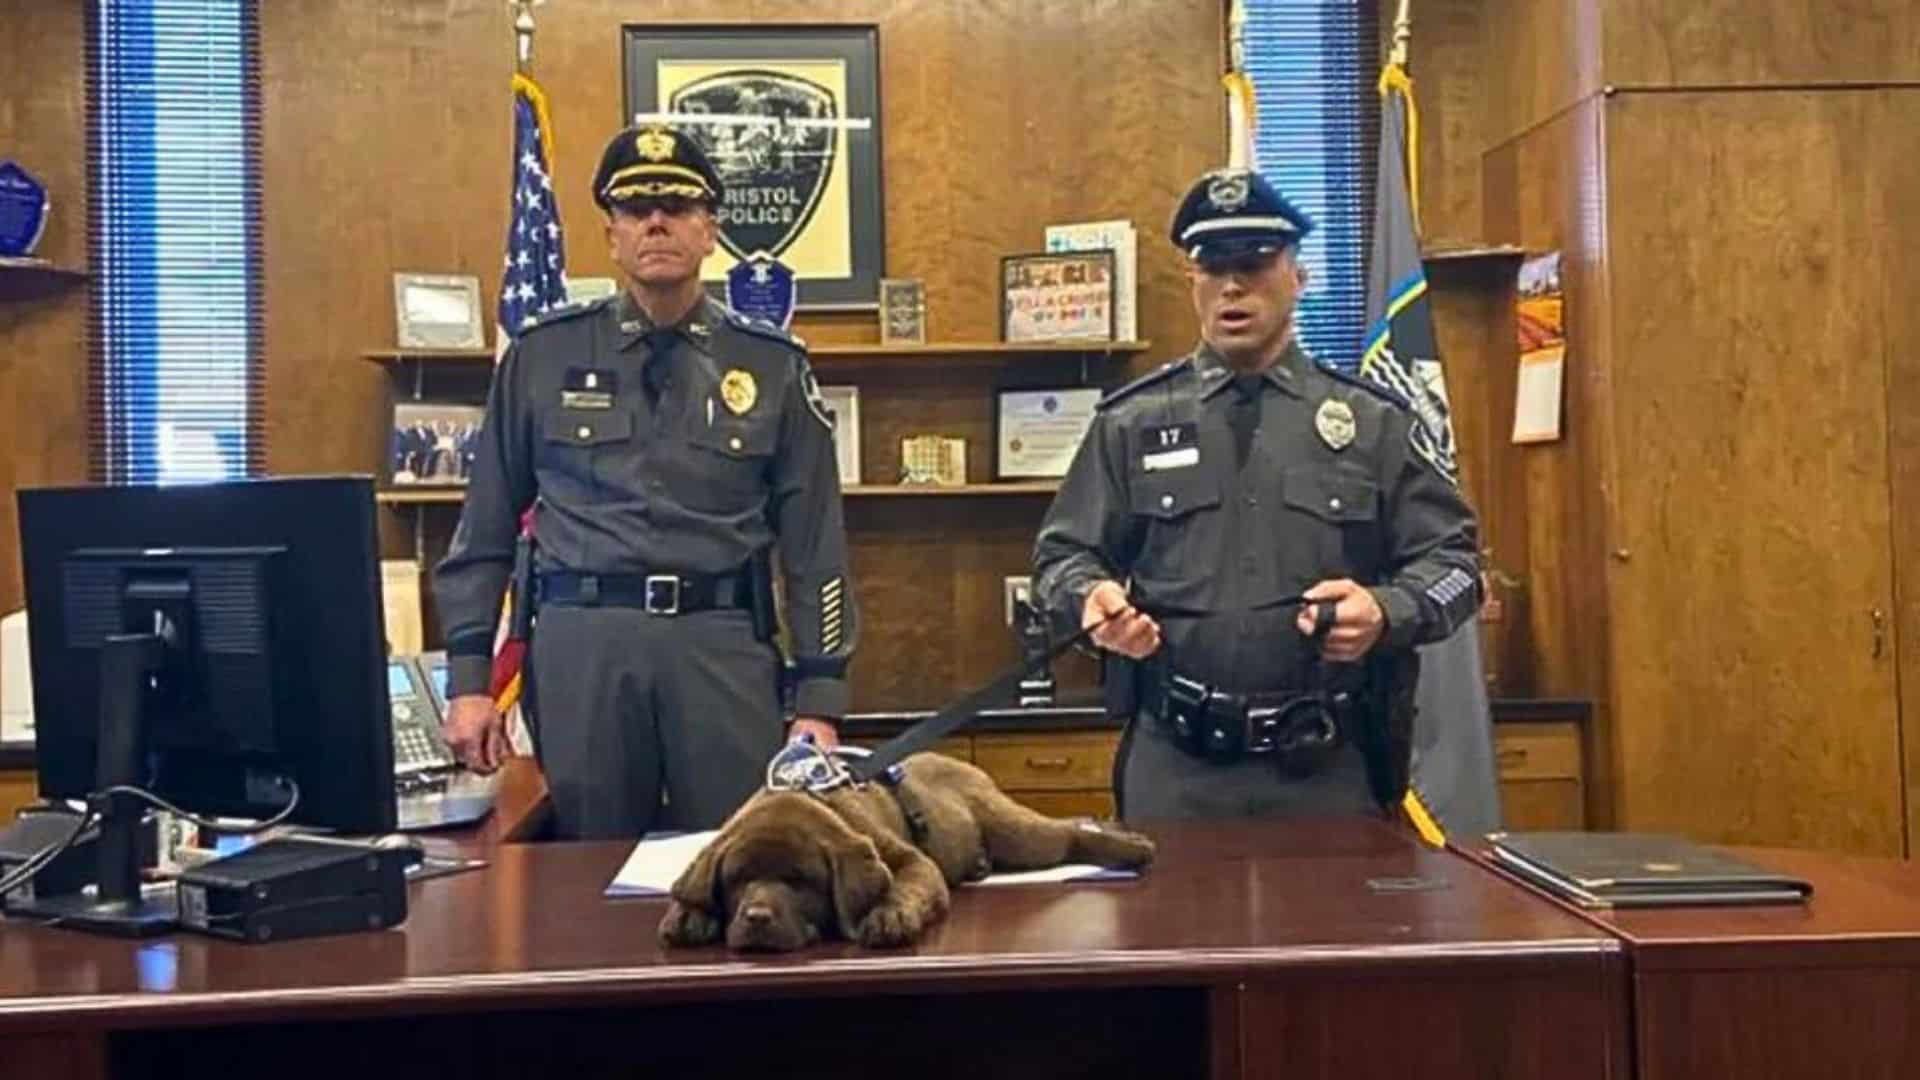 K-9 Puppy Sleeps Through His Entire Swearing-In Ceremony 